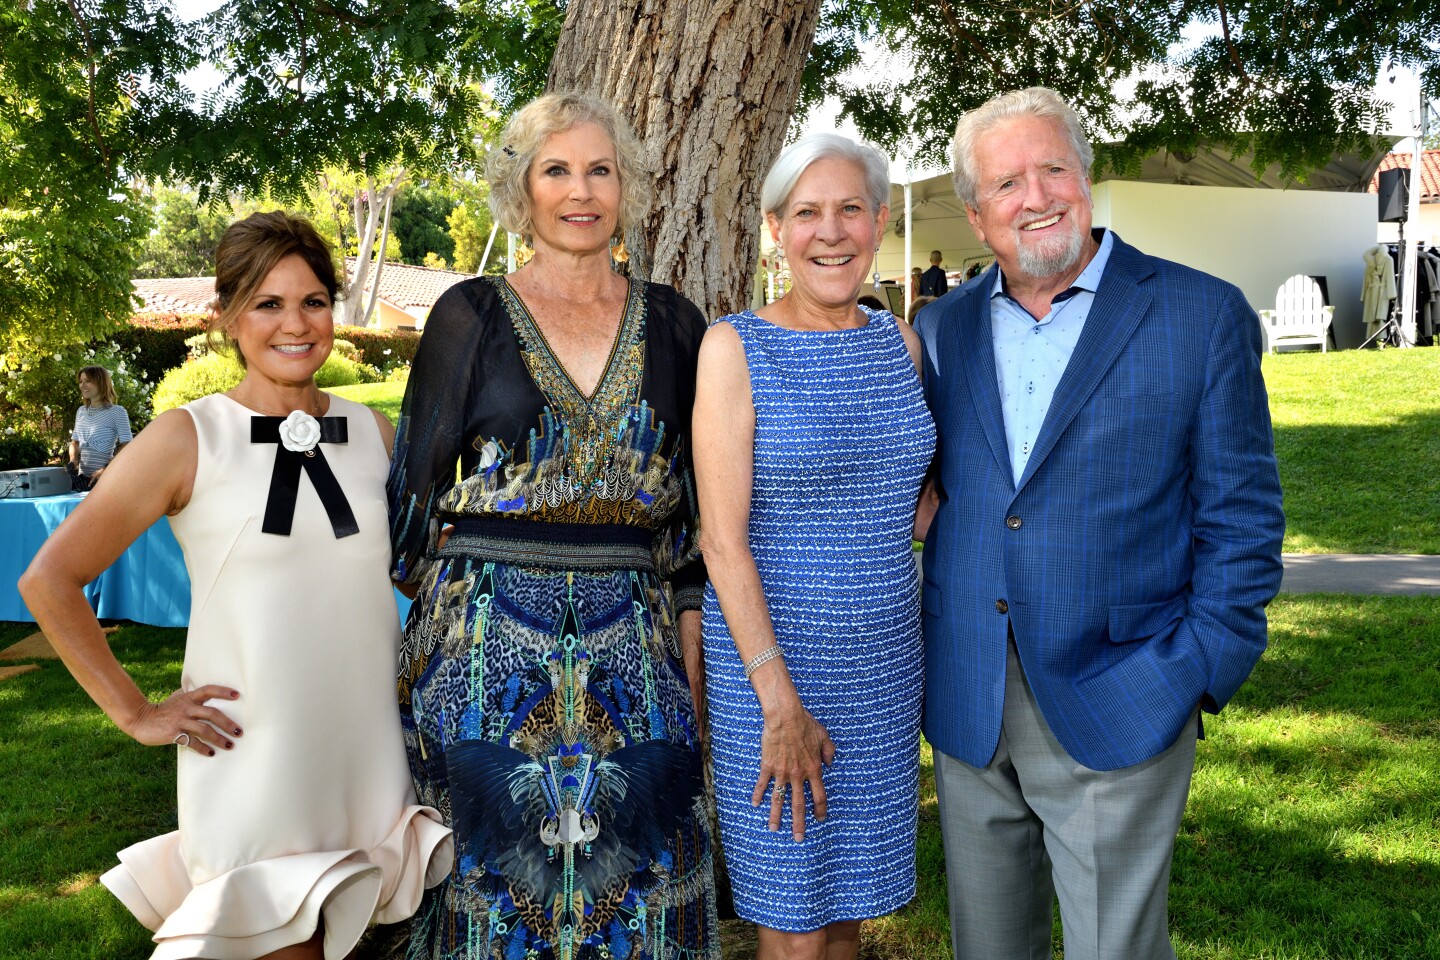 Yvette Letourneau (CF Director of Operations; event co-chair), Suzanne Newman (CF president; event co-chair), Deborah and Les Cross (she's CF VP and event co-chair; both are Art of Fashion honorees)